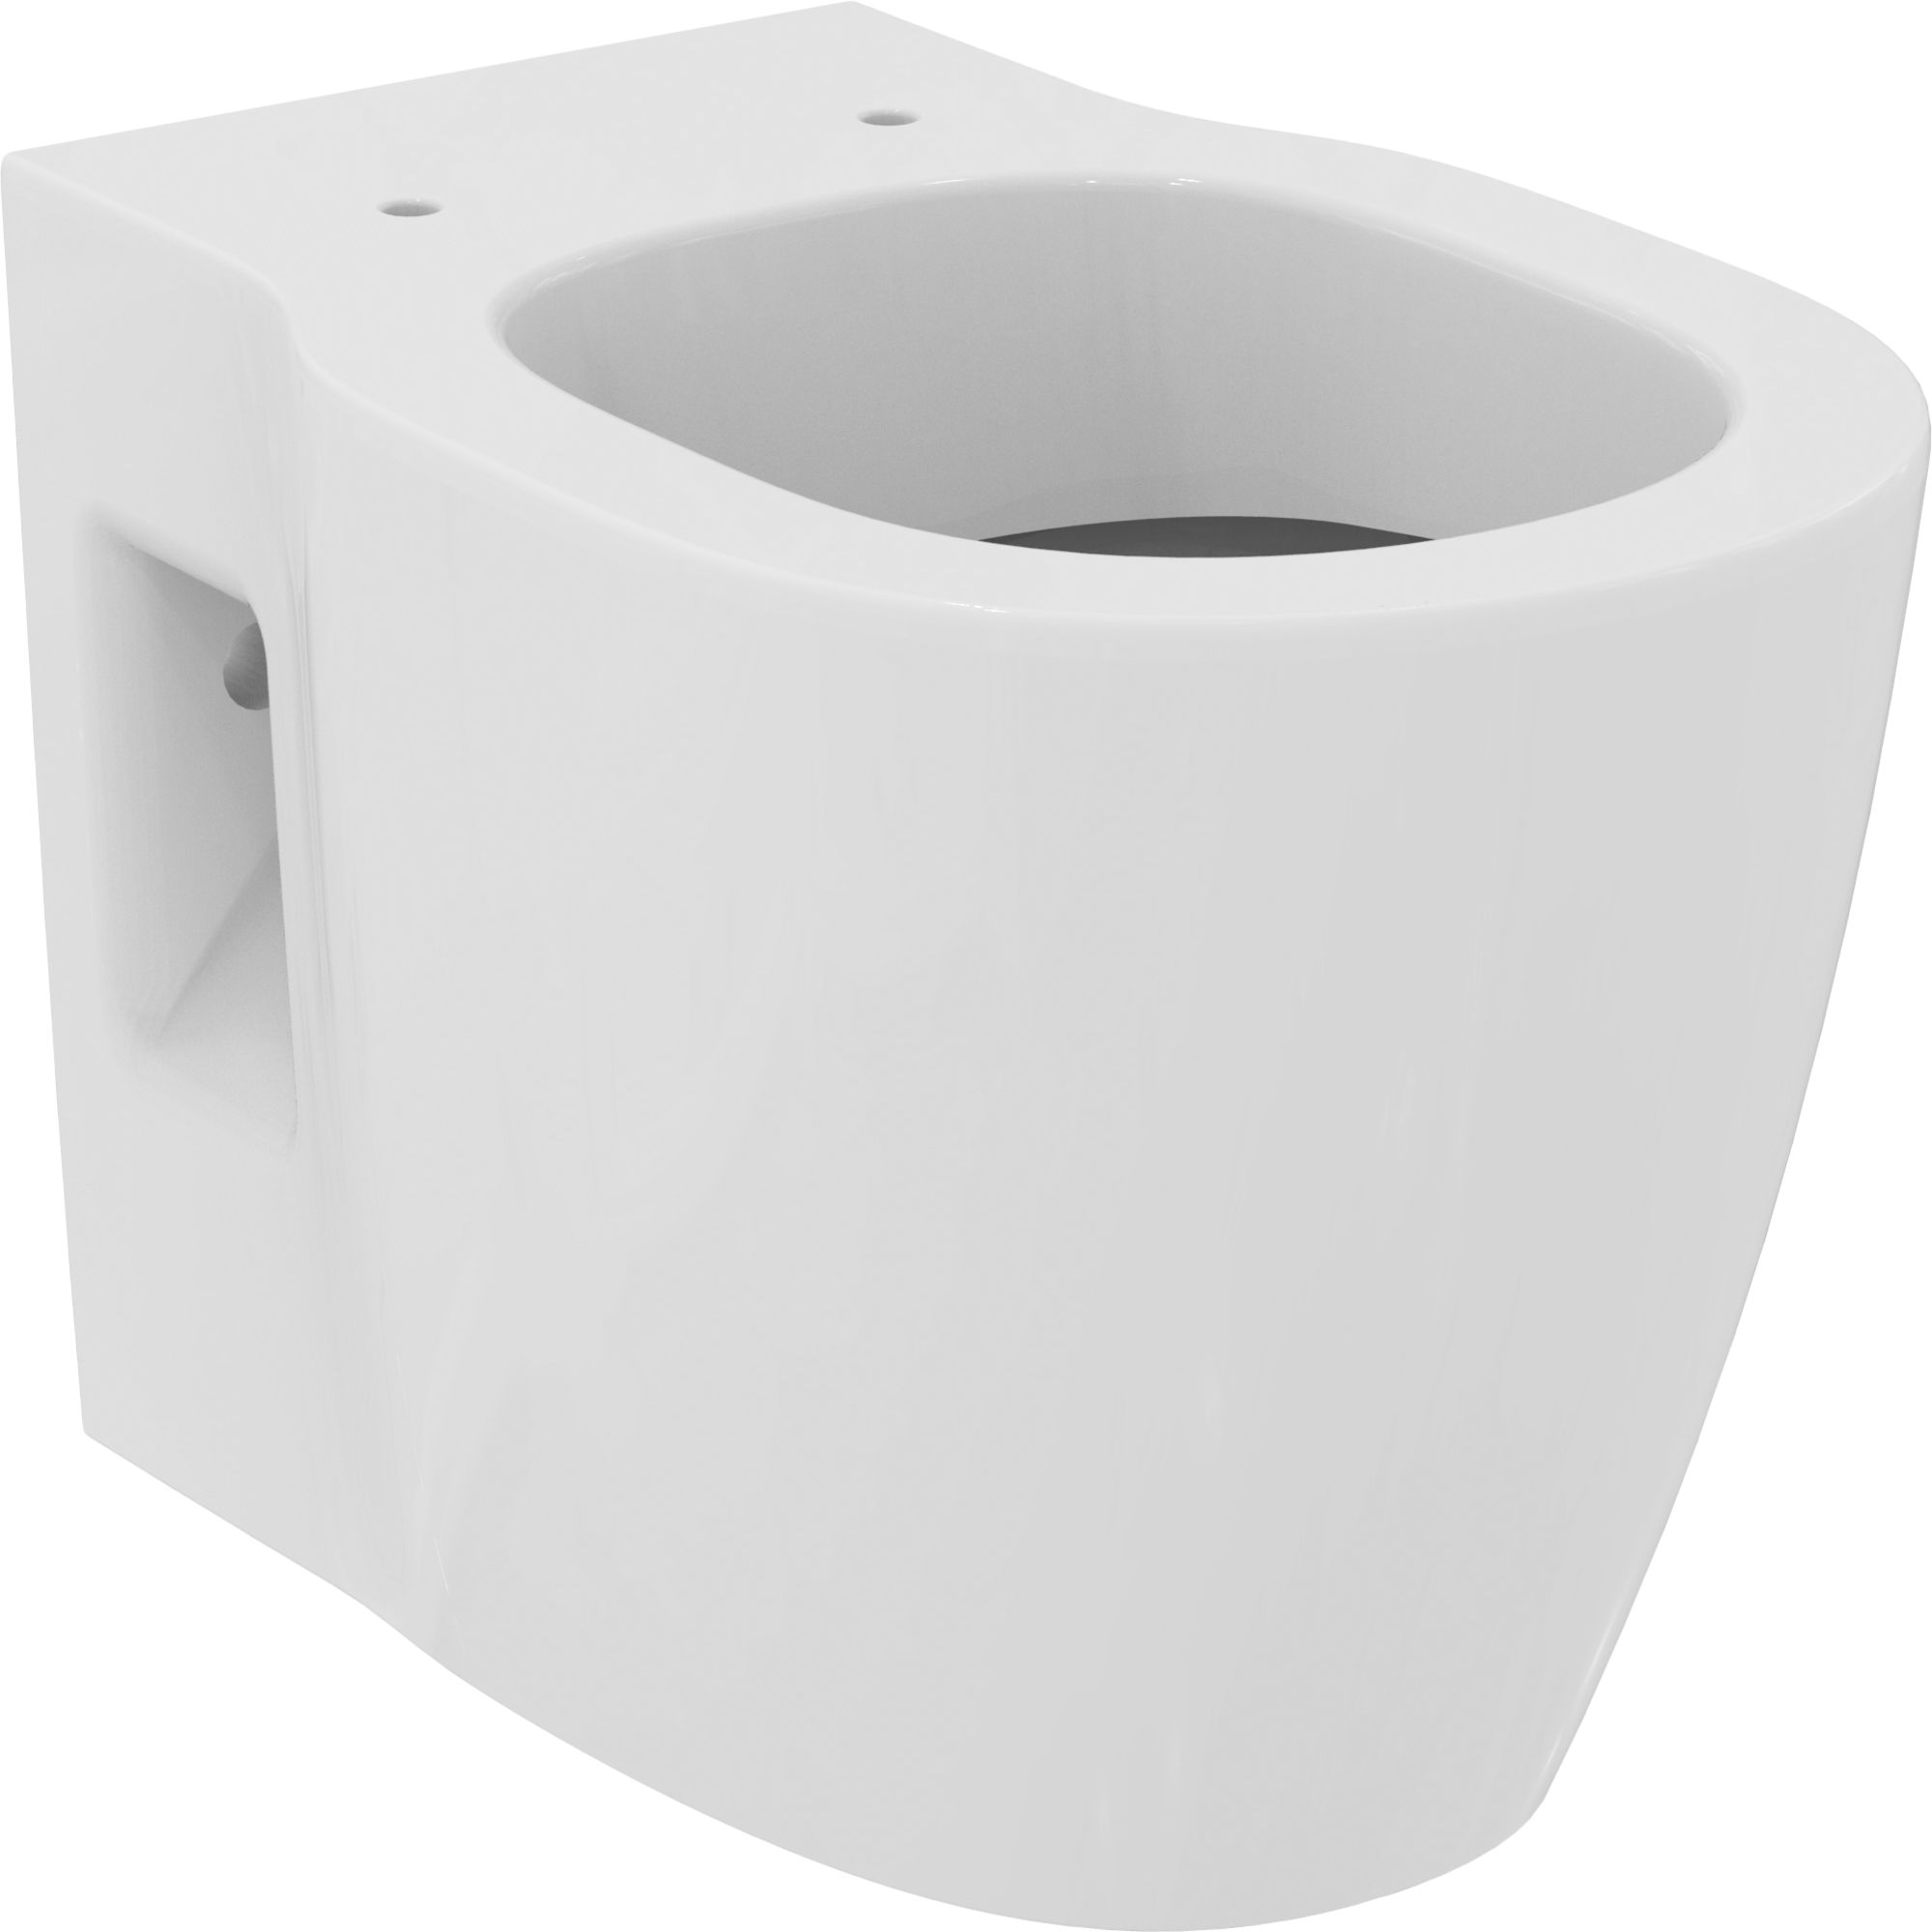 Ideal Standard Concept Freedom Comfort height White Boxed rim Wall hung  Round Toilet pan